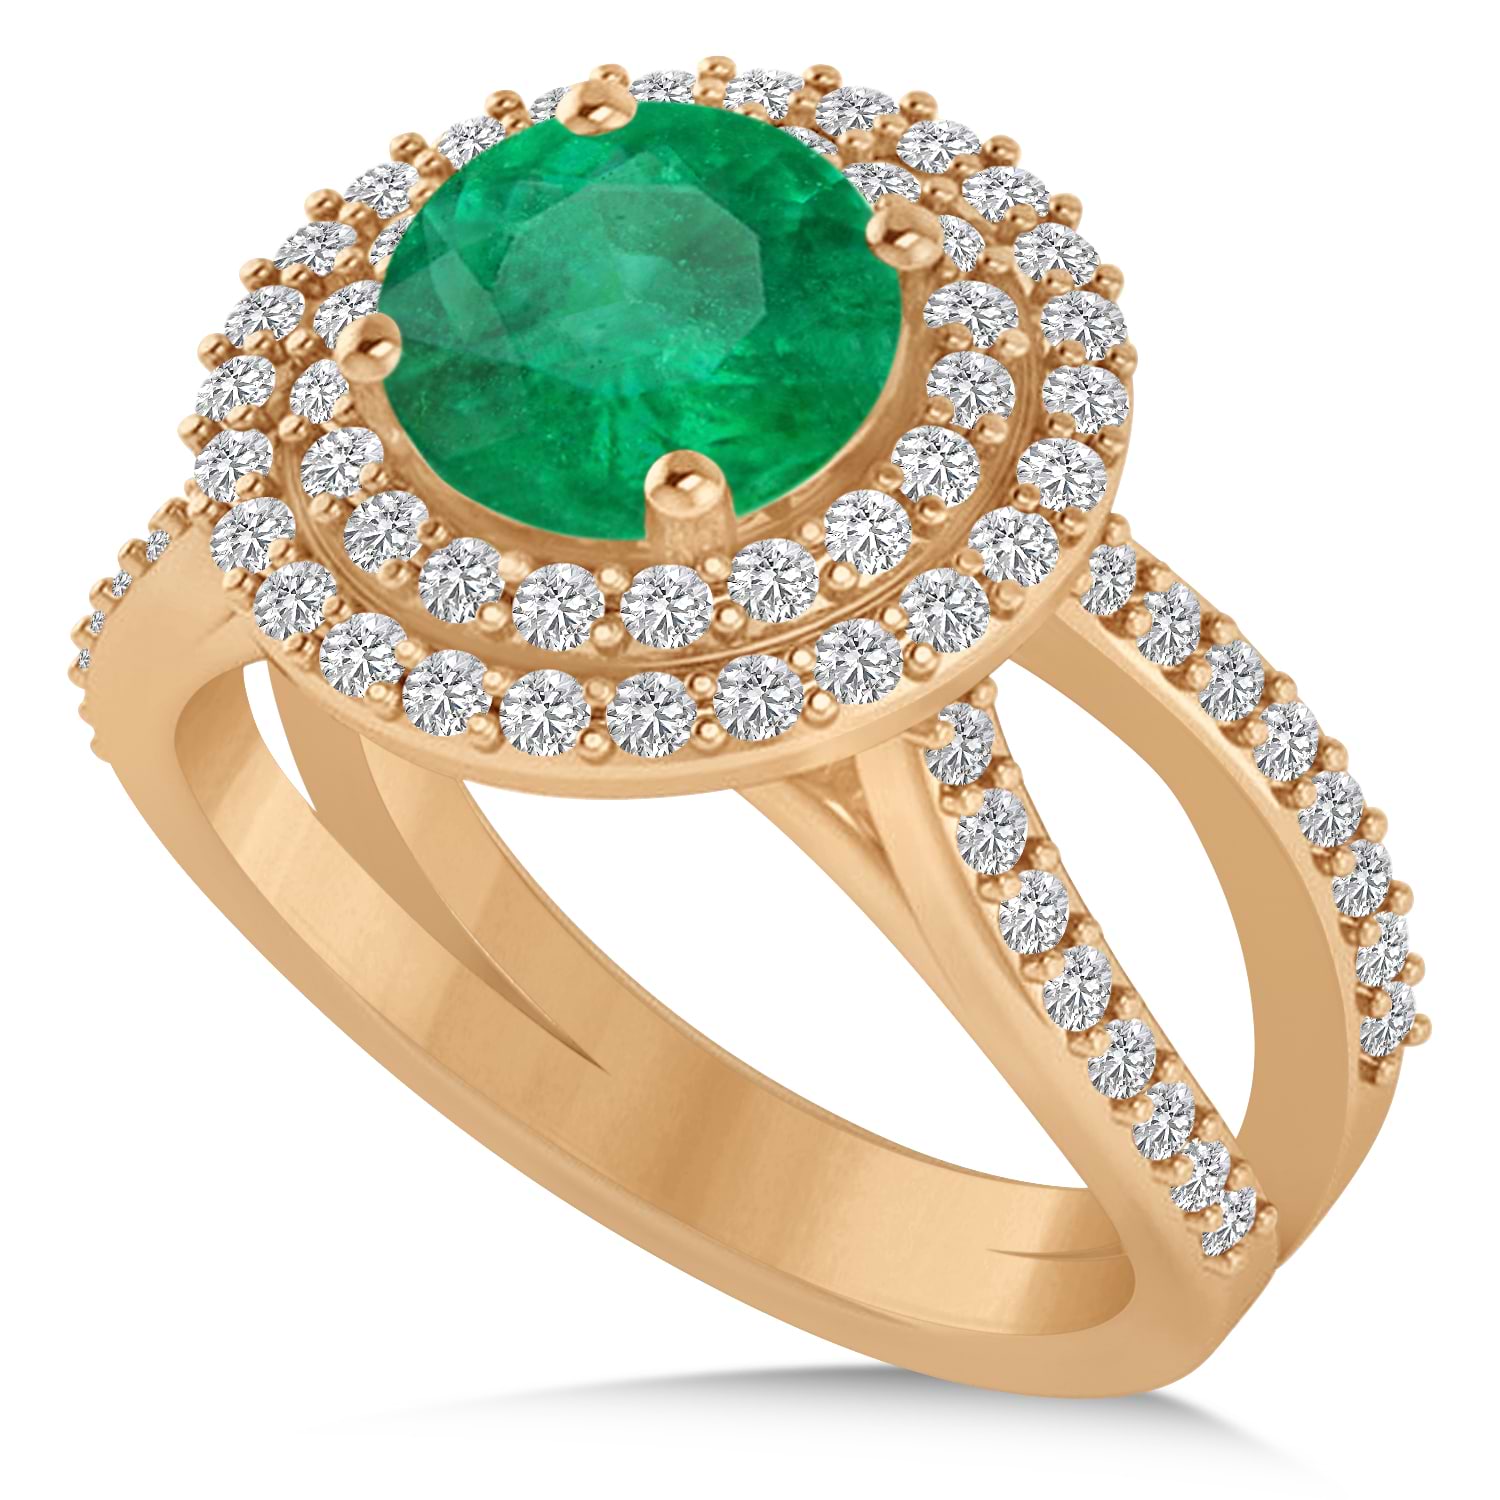 Double Halo Emerald Engagement Ring 14k Rose Gold (2.27ct)